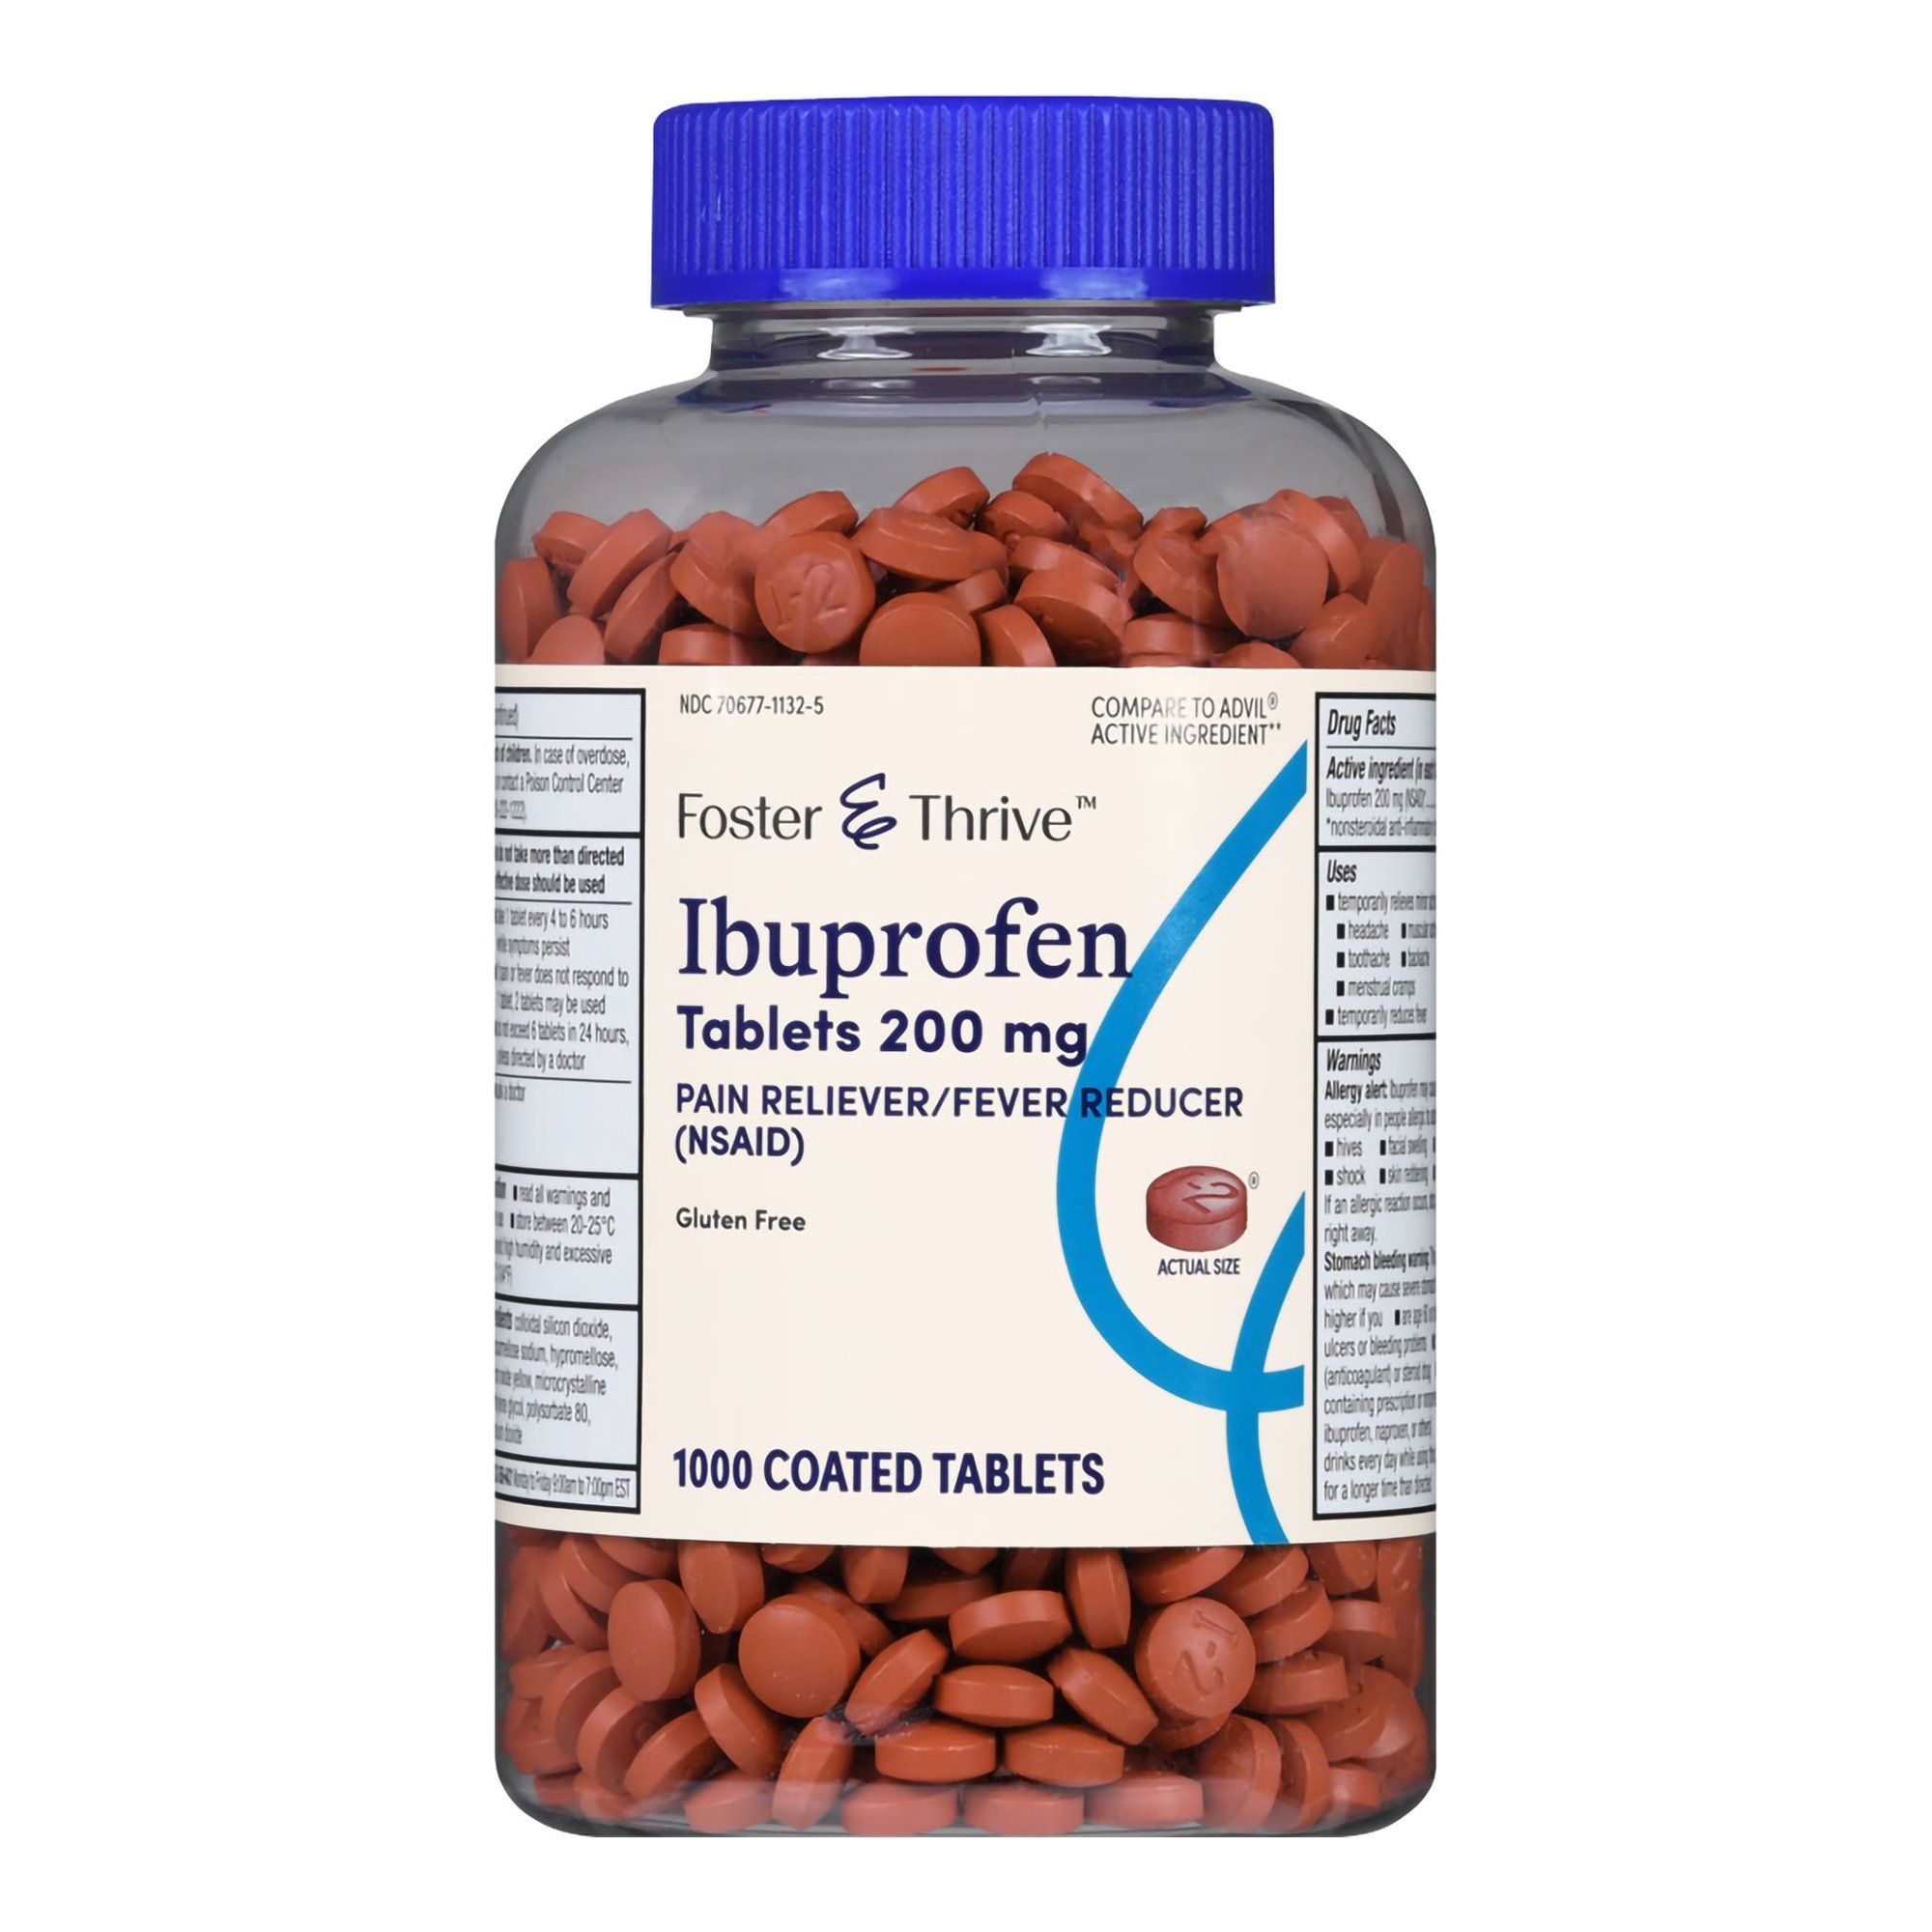 Foster & Thrive Ibuprofen Coated Tablets,  200 mg - 1000 ct